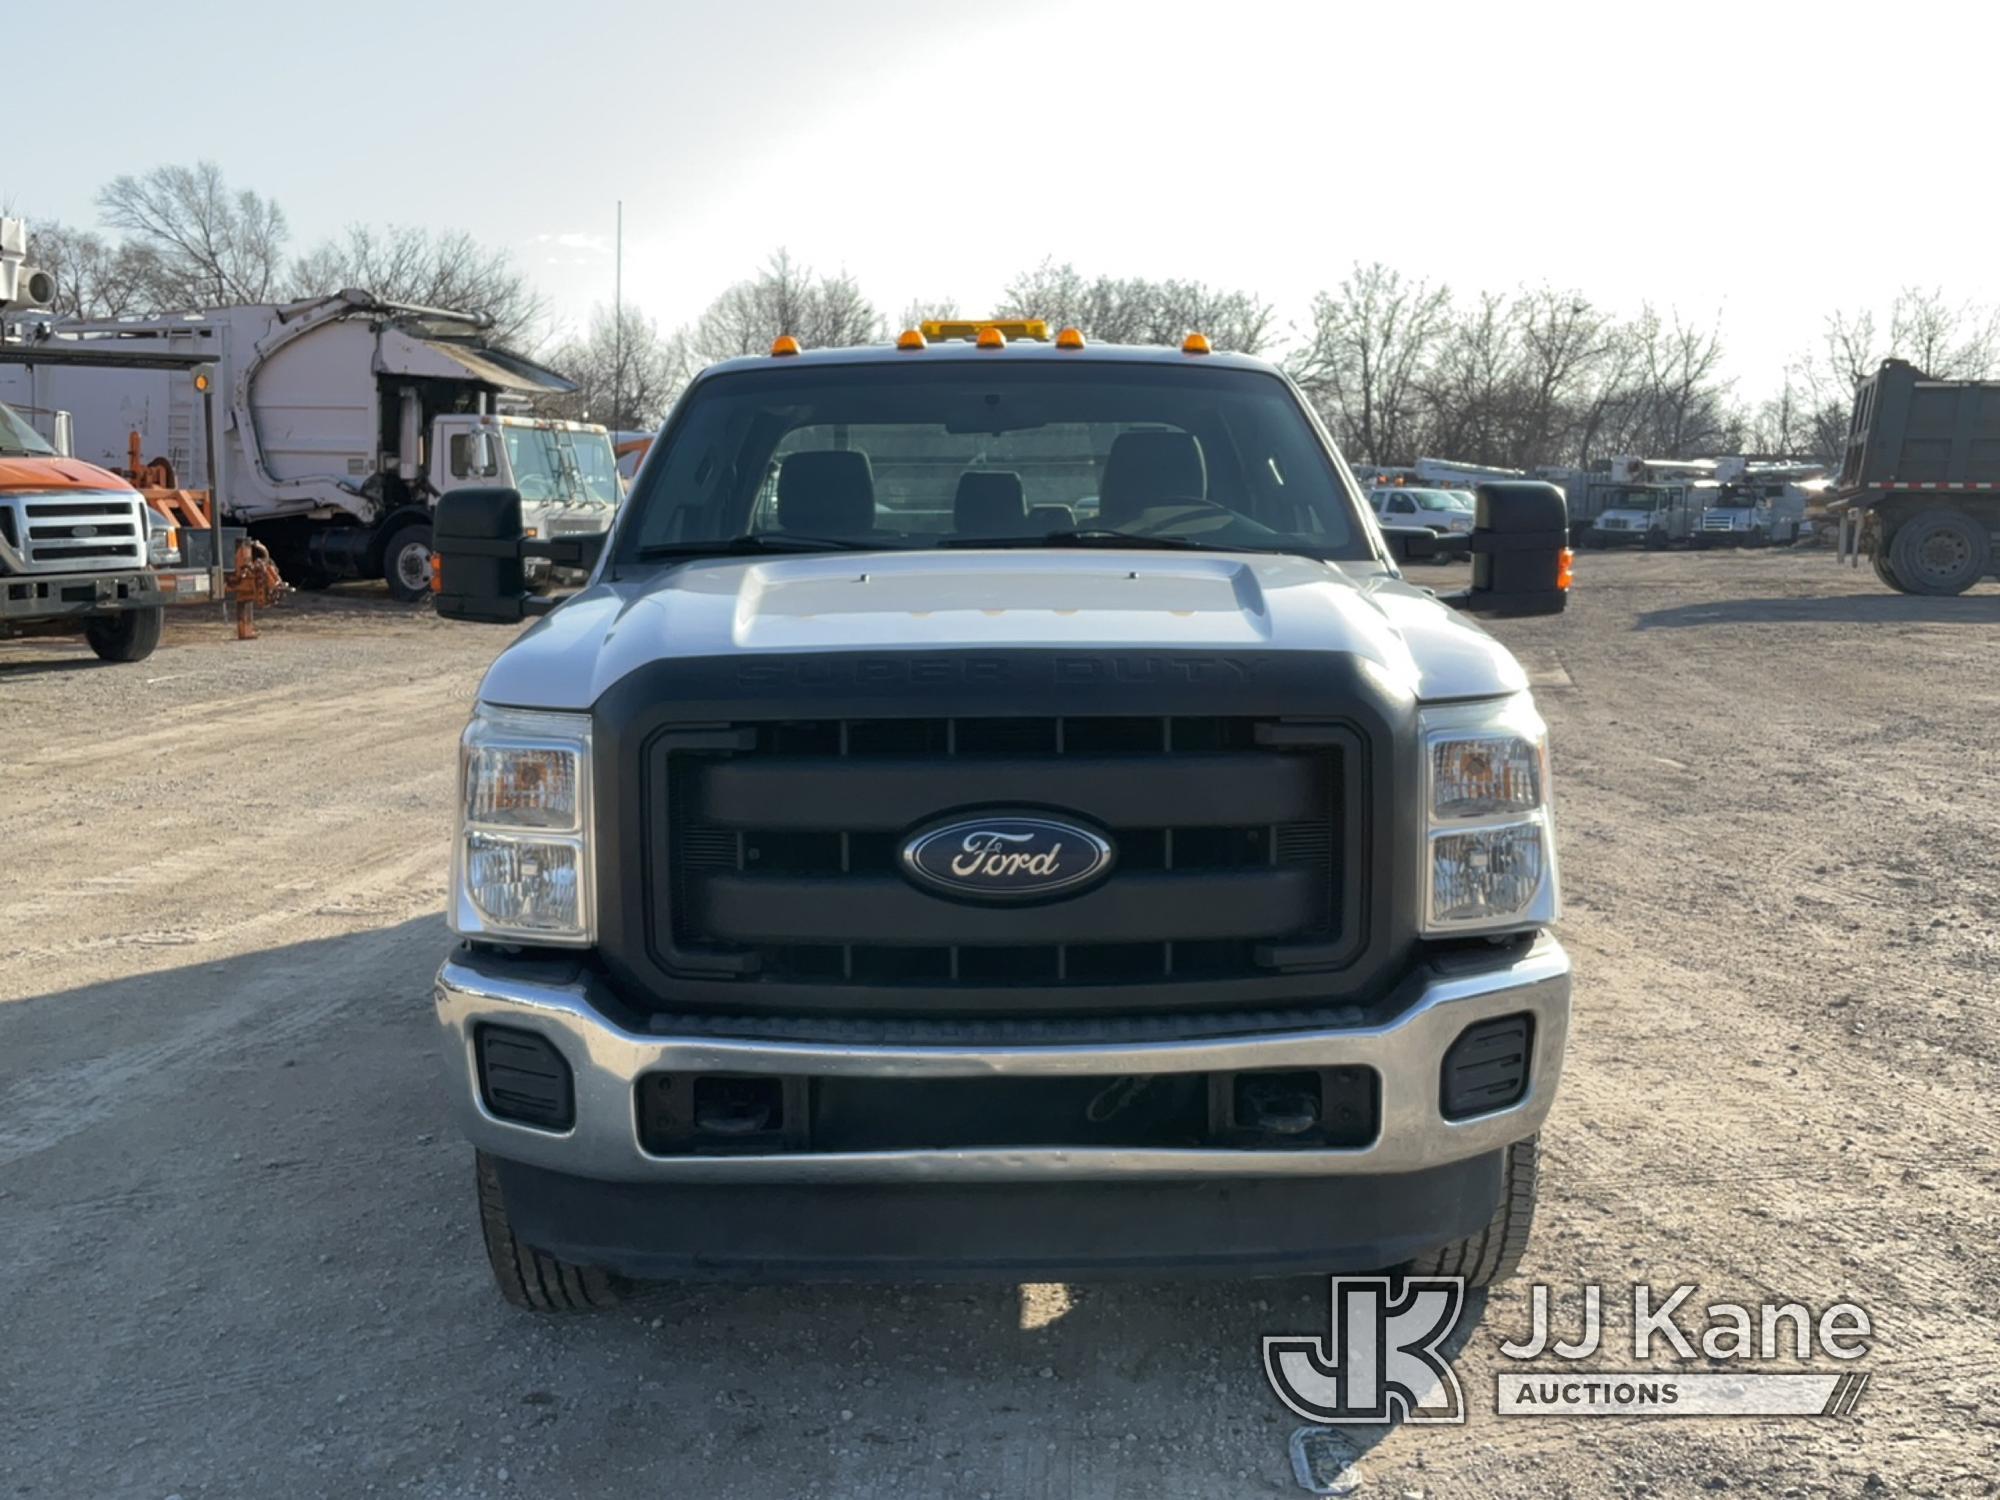 (Des Moines, IA) 2015 Ford F250 4x4 Crew-Cab Pickup Truck Runs & Moves) (R Side Mirror Damaged, Body